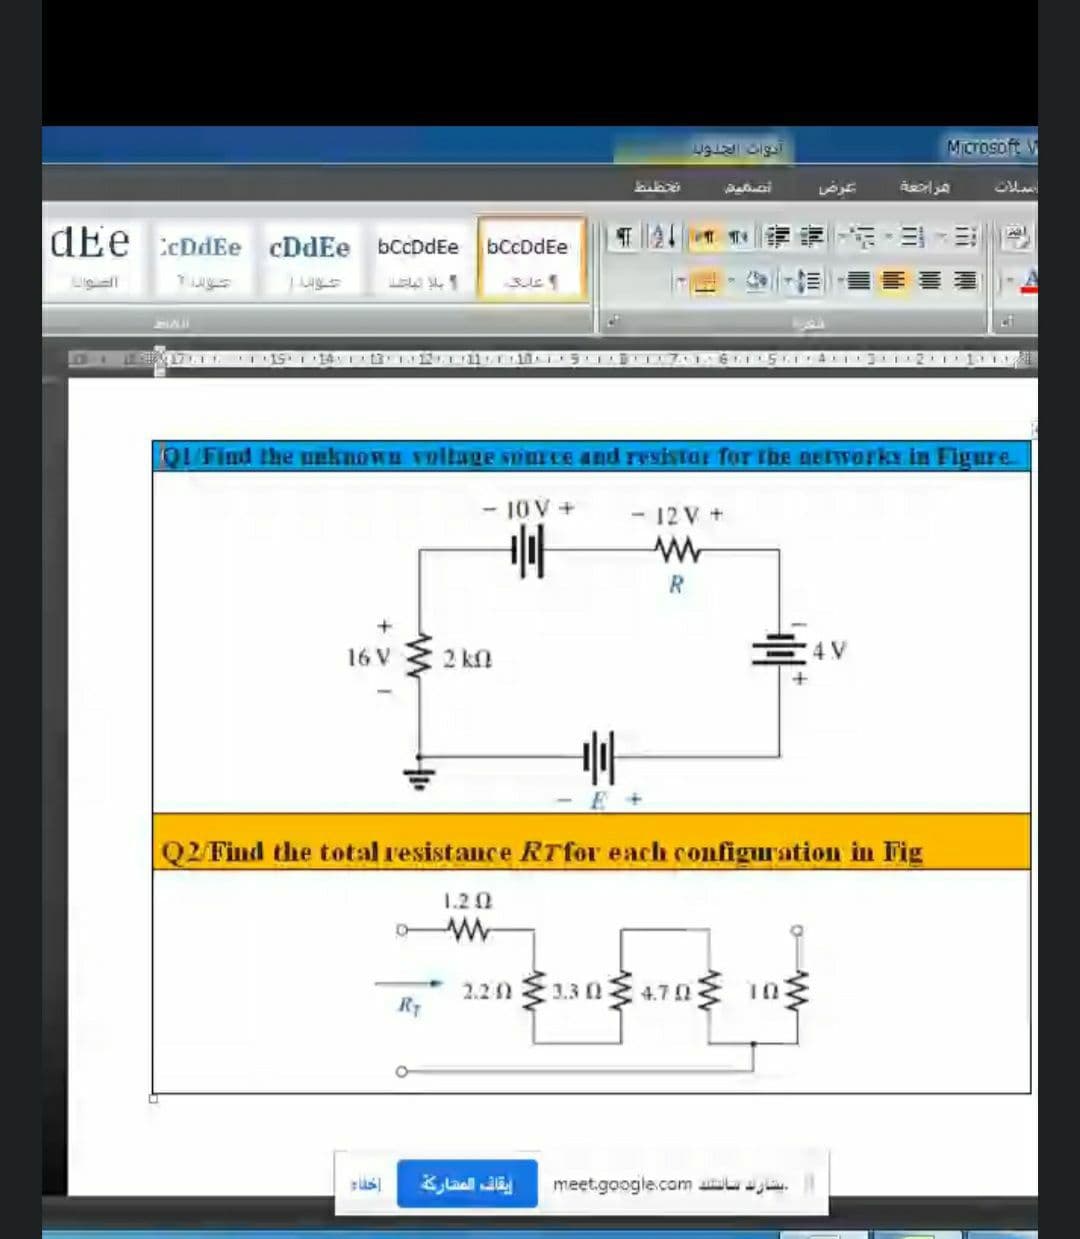 Microsoft W
تصقيت
عرض
dEe :cDdEe cDdEe bccDdEe
,示,ヨ-三|
bCcDdEe
Ligll
看
6.1SII AIJ I2I 1 LL
QU'Find the ueknown voltage source and resistar for Ihe networky in Figure
- 10V+
- 12 V +
R
16 V 2 kfl
三4V
Q2 Find the total resistance RTfor each configuration in Fig
1.20
2.2n1.30 4.70 ing
R7
Laal J
meet.google.com .
